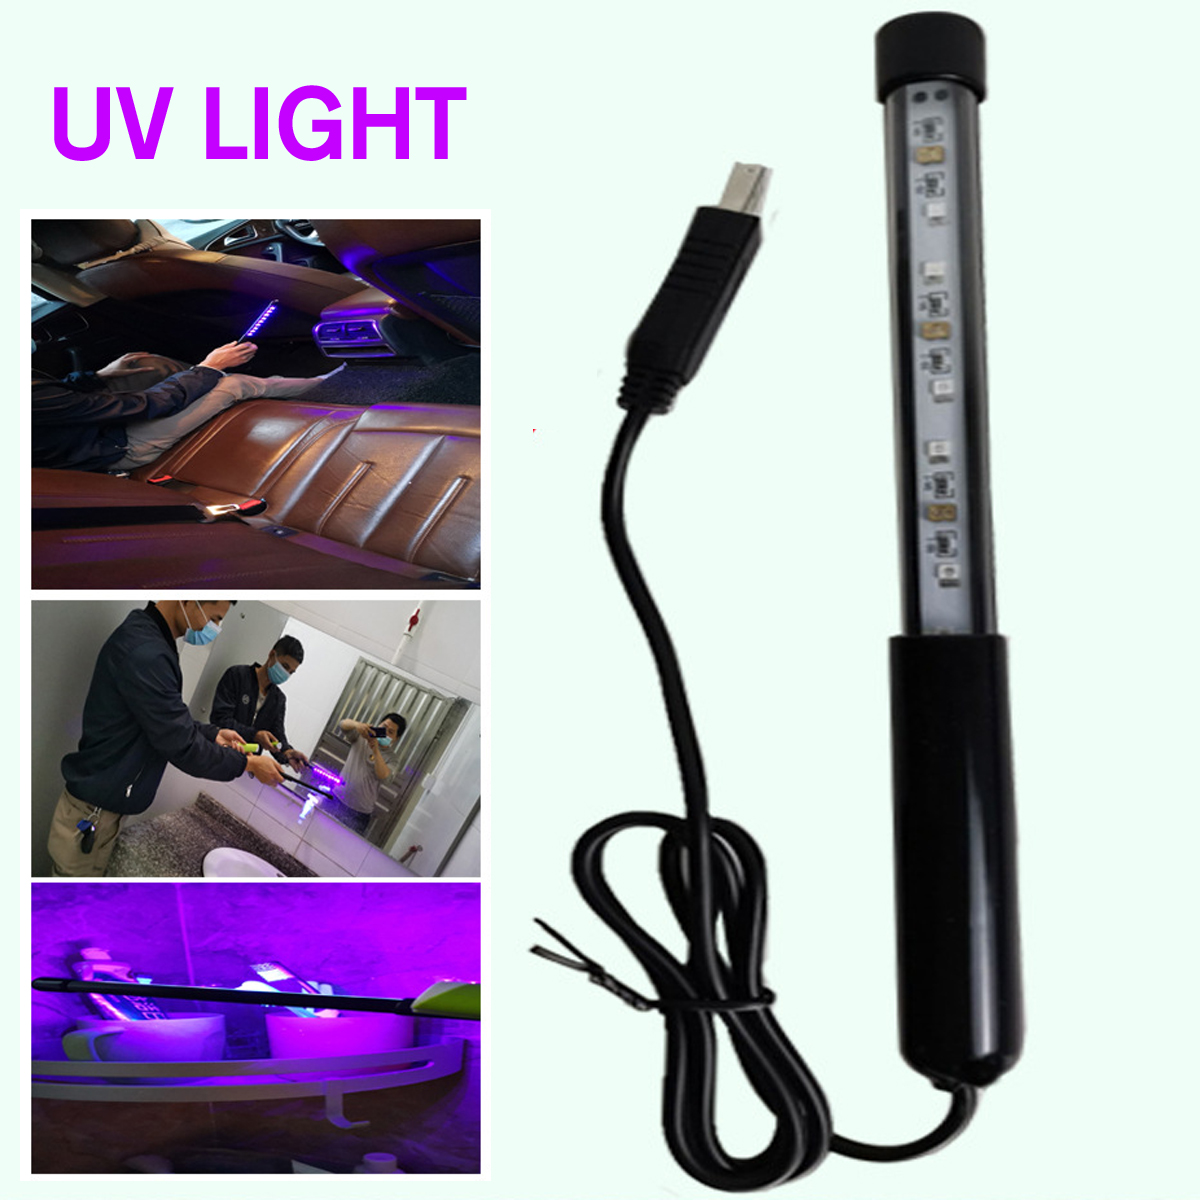 Mobile-UV-Disinfection-Lamp-USB-Charging-Portable-Disinfection-Stick-Uv-Mask-Germicidal-Lamp-Rod-Ste-1689247-6